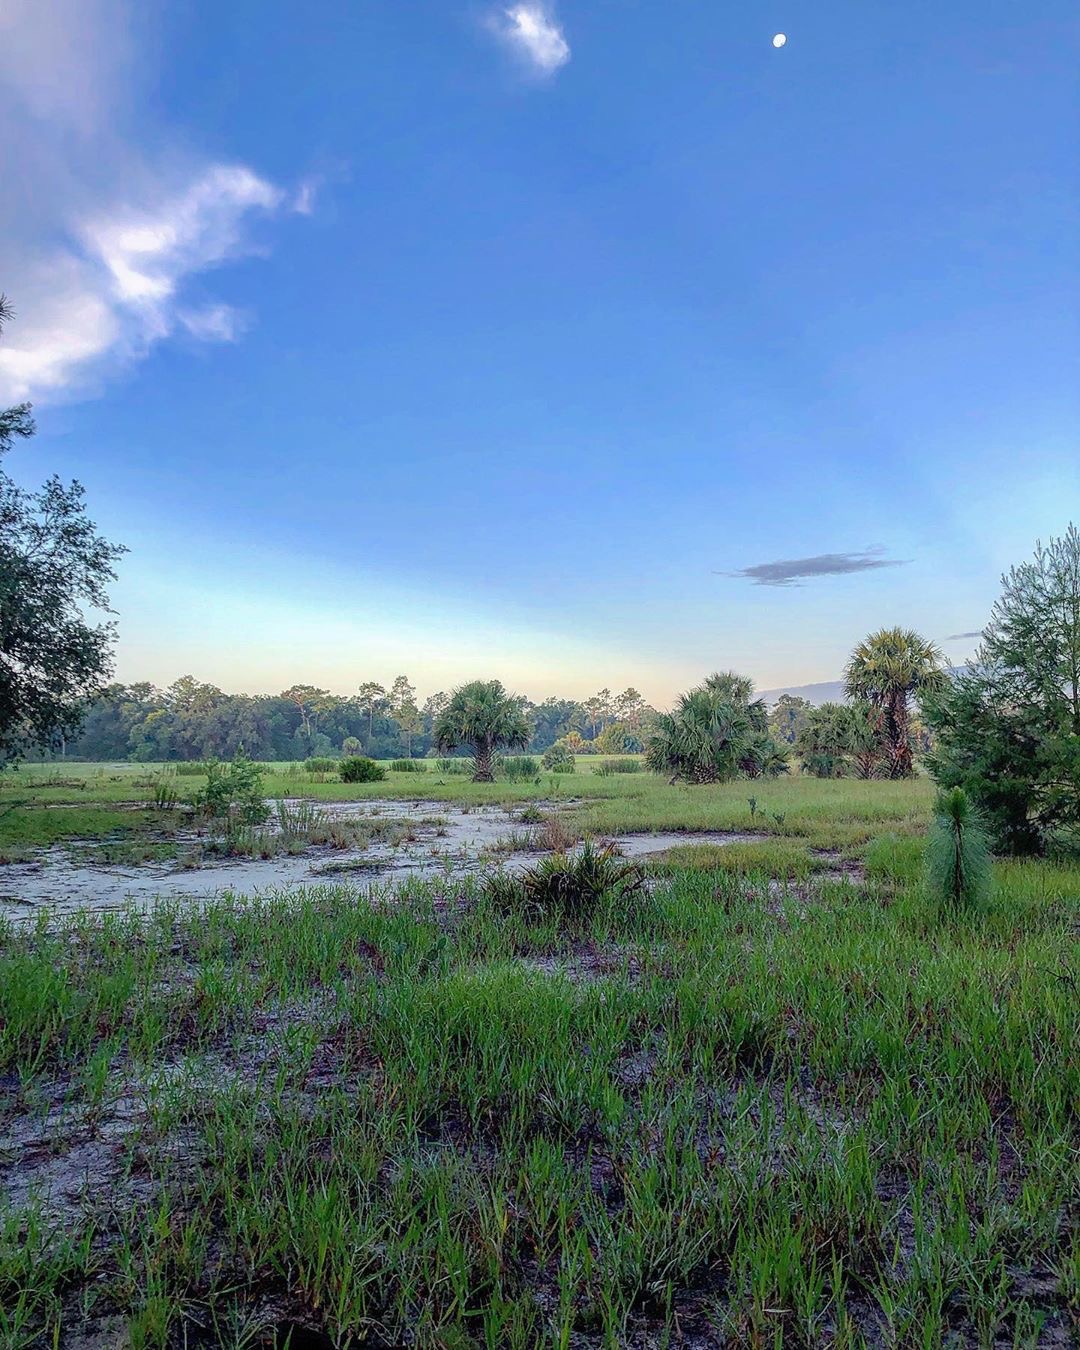 Open flat area with Sabal Palm trees scattered around. A forest line is on the horizon and the picture was taken at dusk.